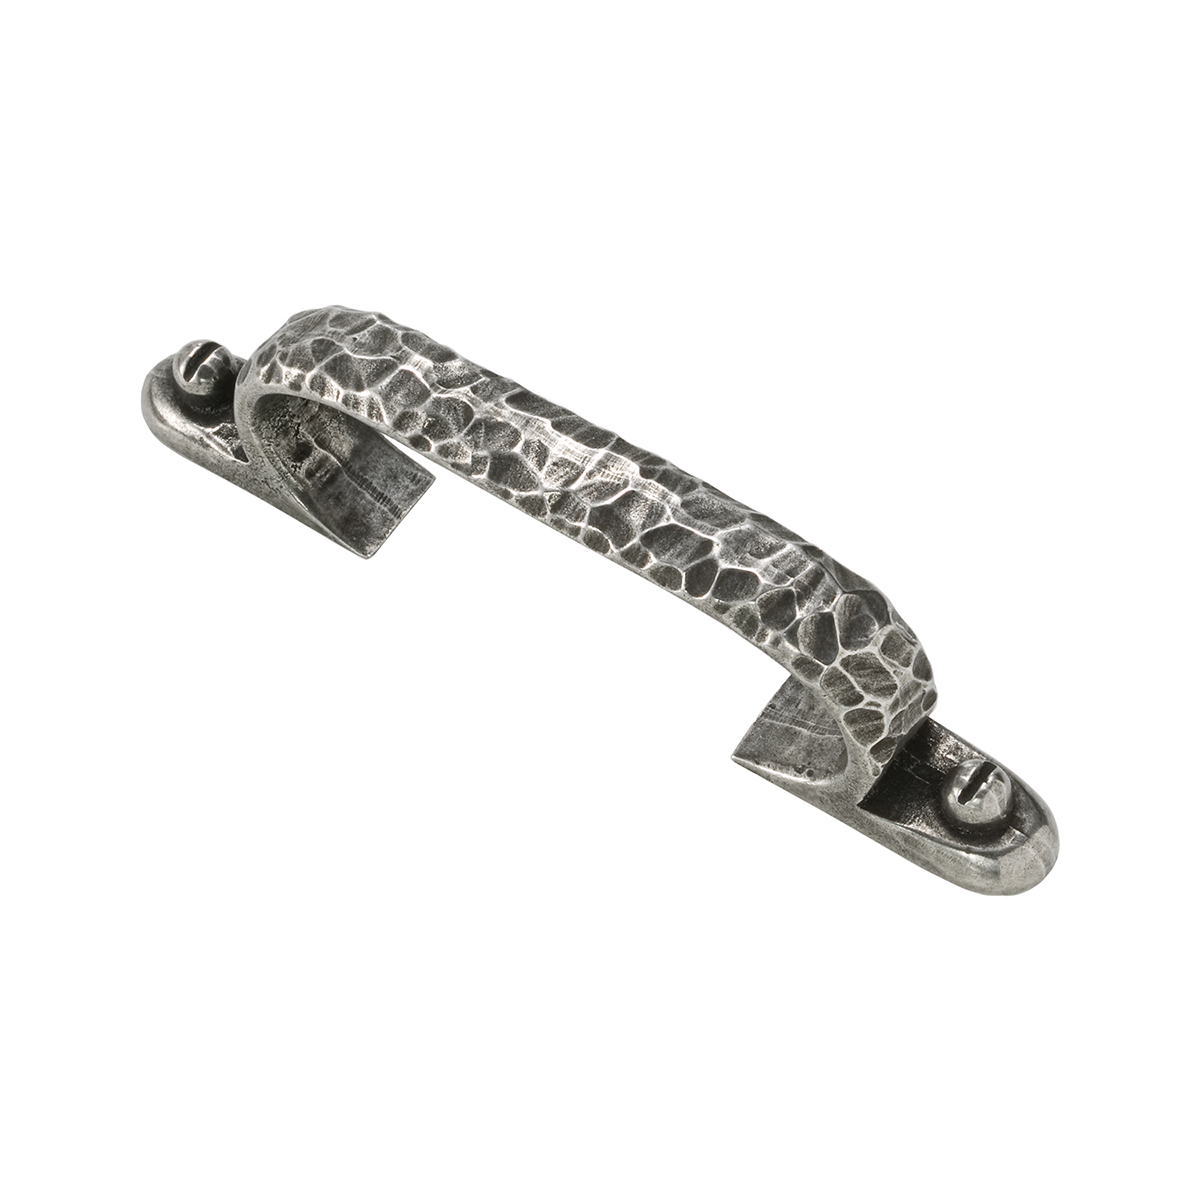 Hammered pewter pull handle